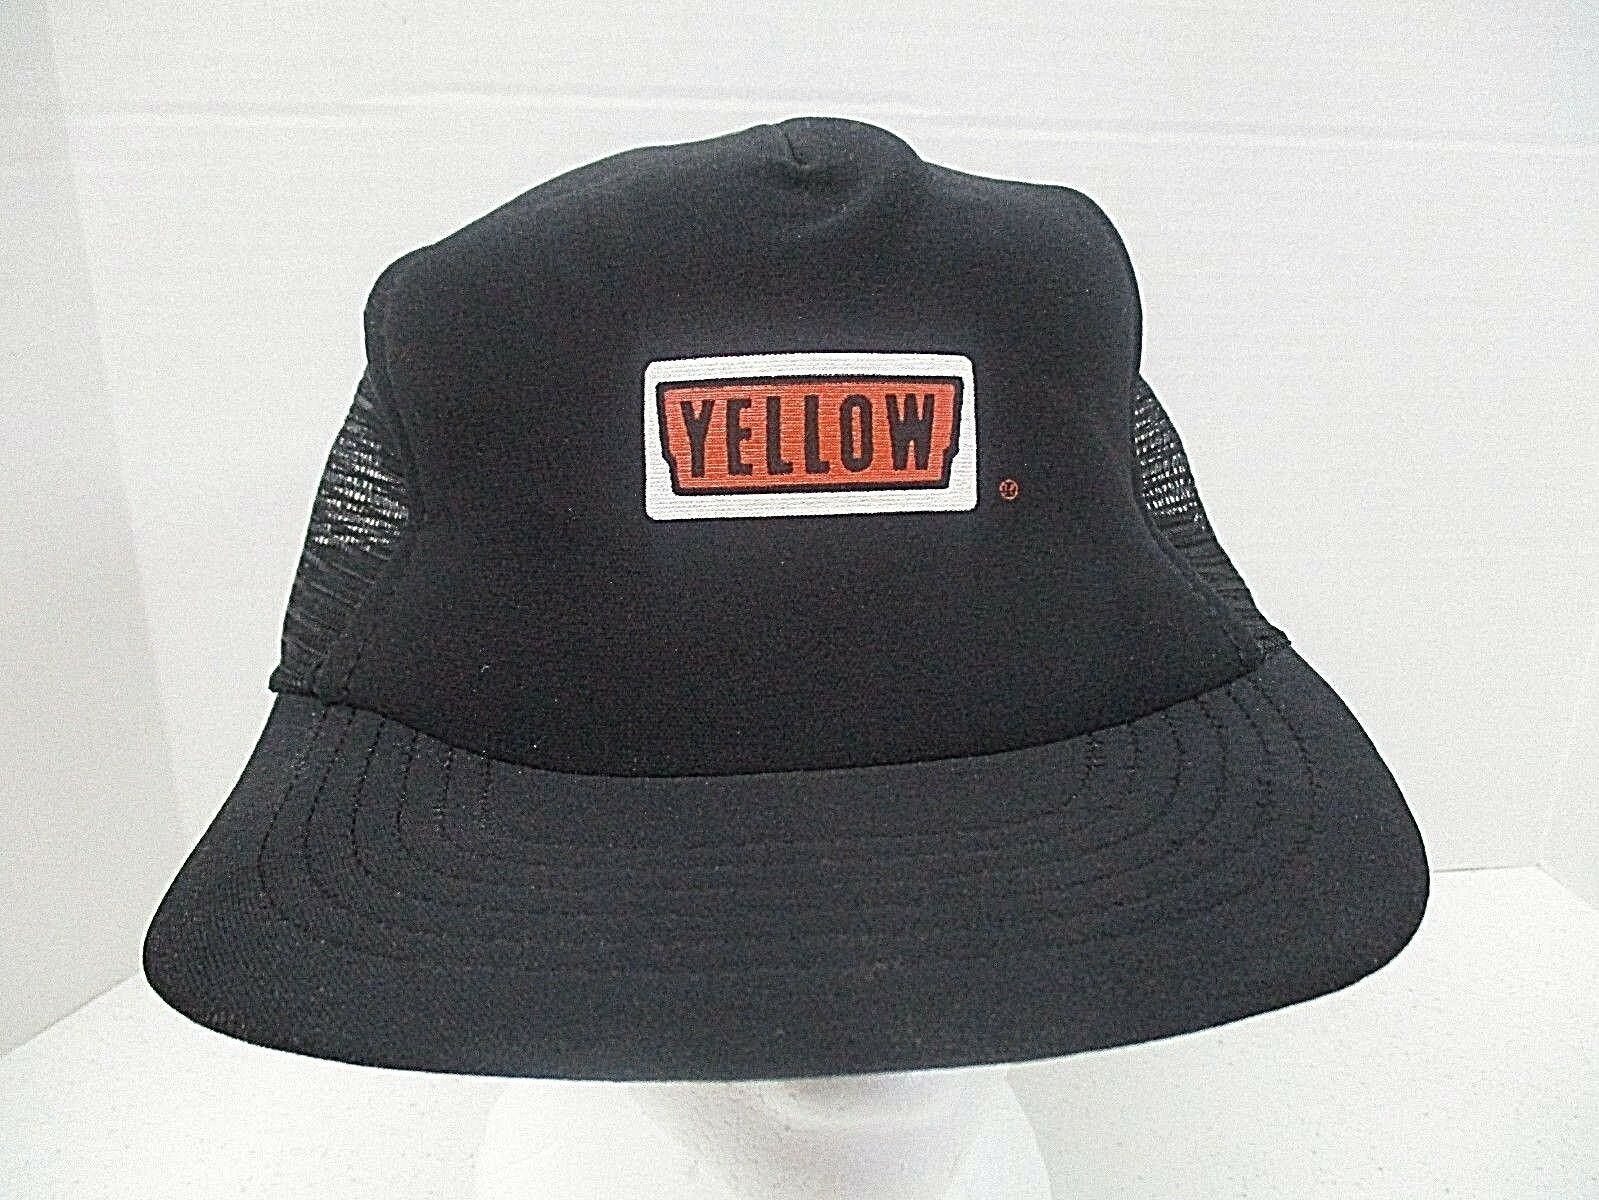 Primary image for Yellow Freight System Trucker Mesh Snapback Hat Black Stylemaster Union MO USA